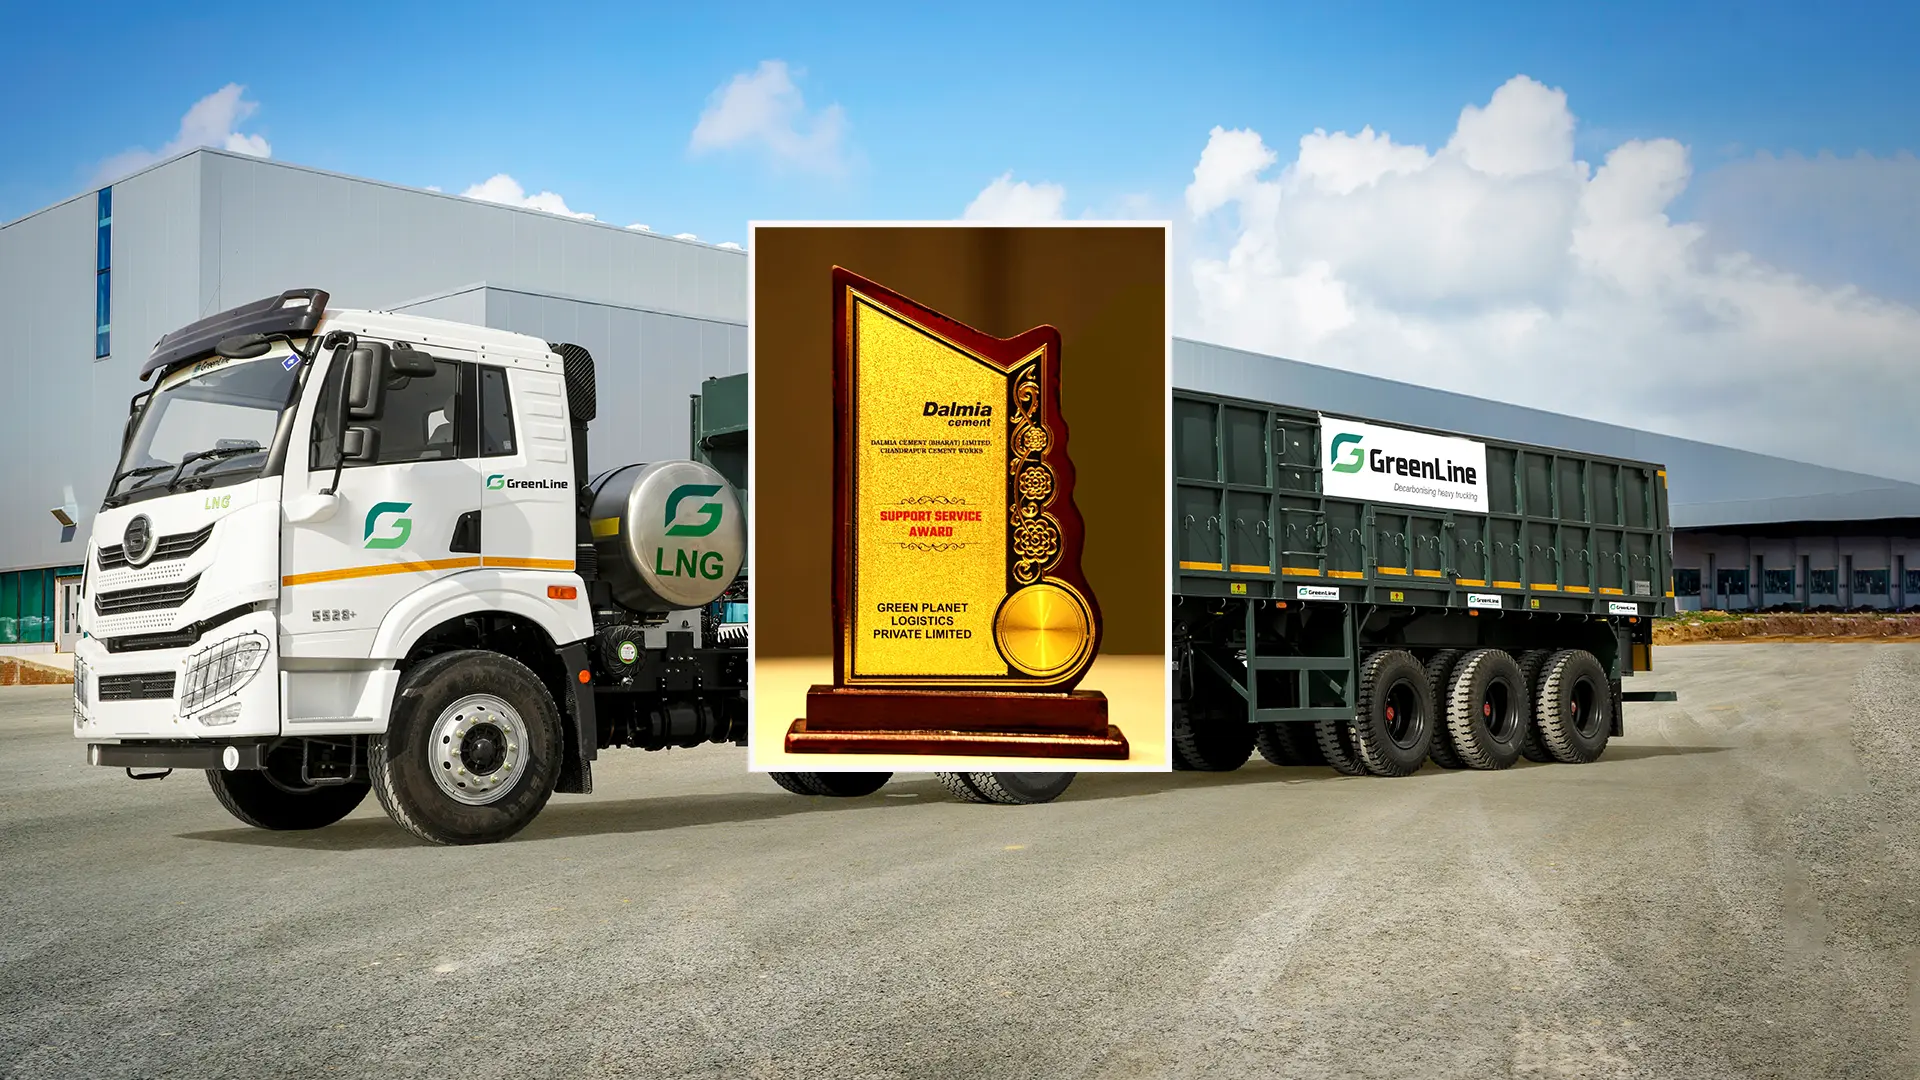 Greenline Bags “Support Service Award” from Dalmia Cement